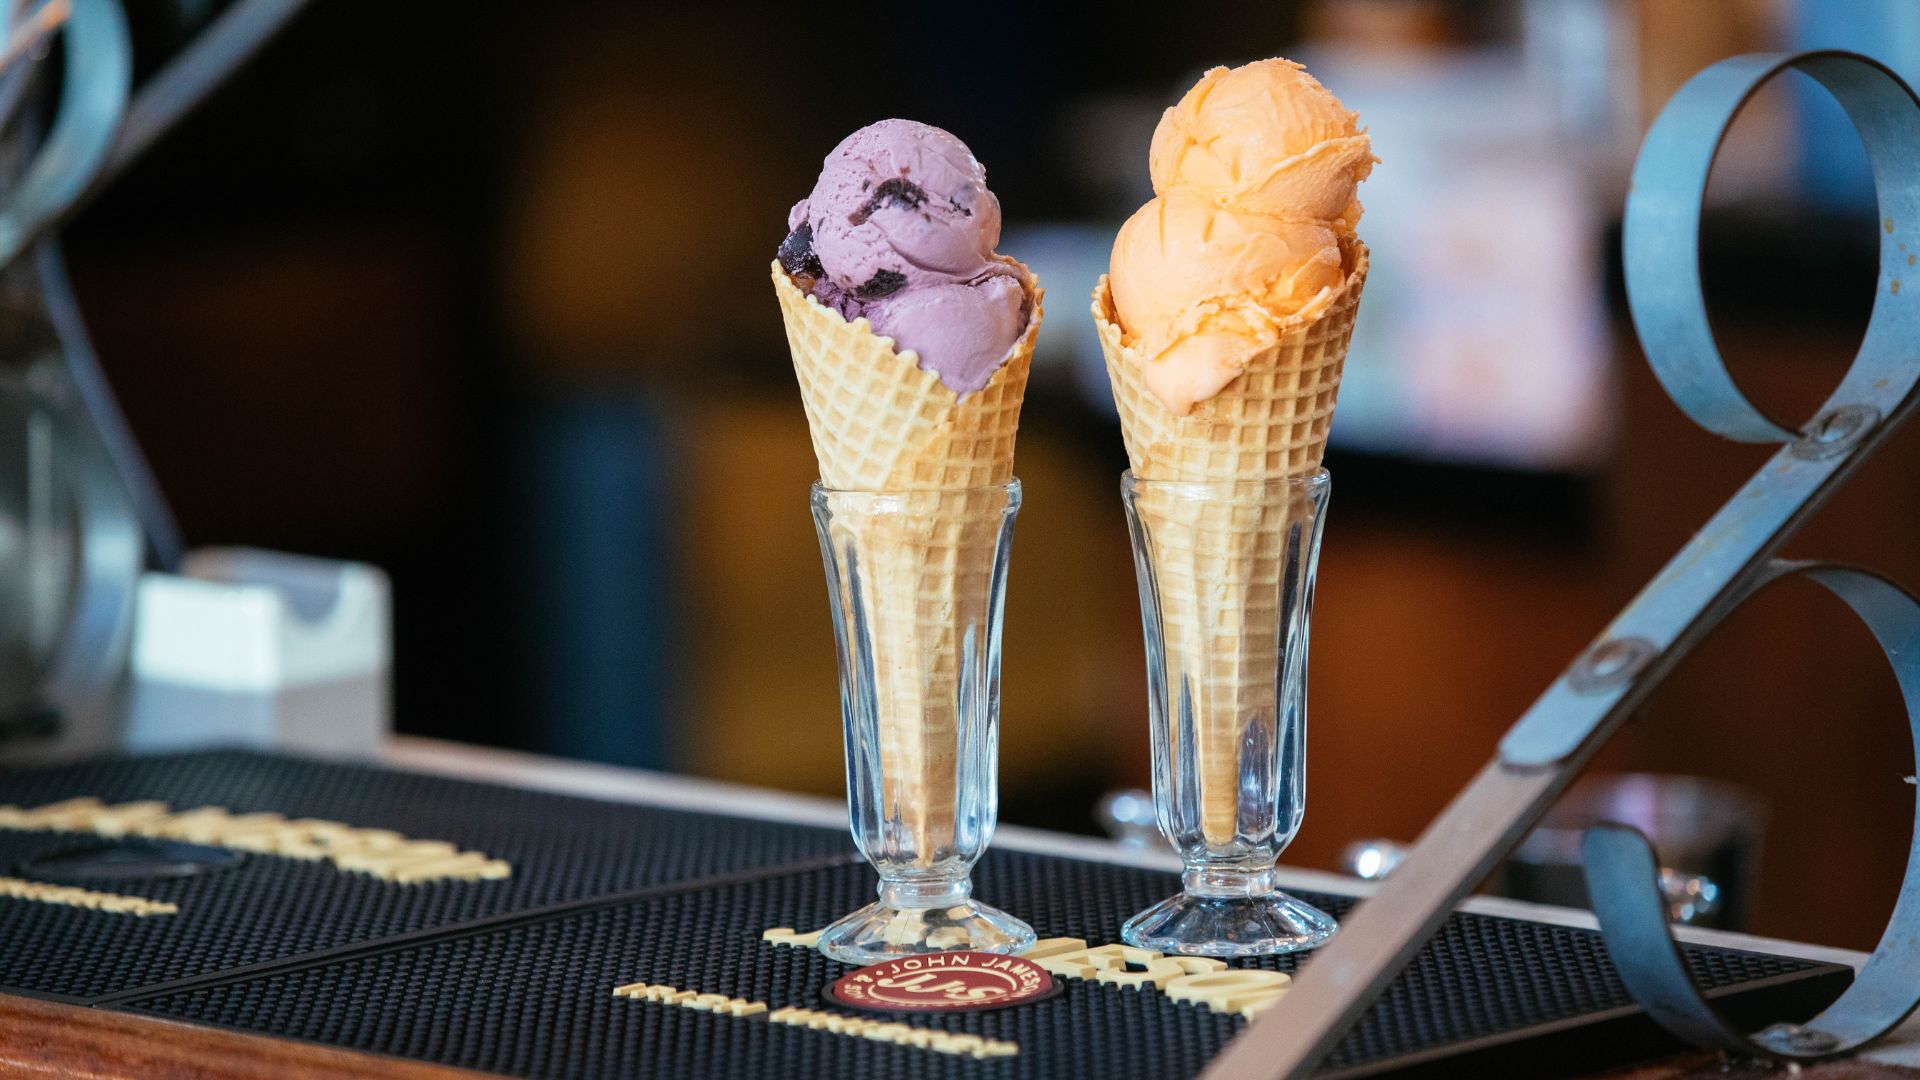 The Fountain on Locust is home to the ice cream martini, but it also serves ice cream cones like these.